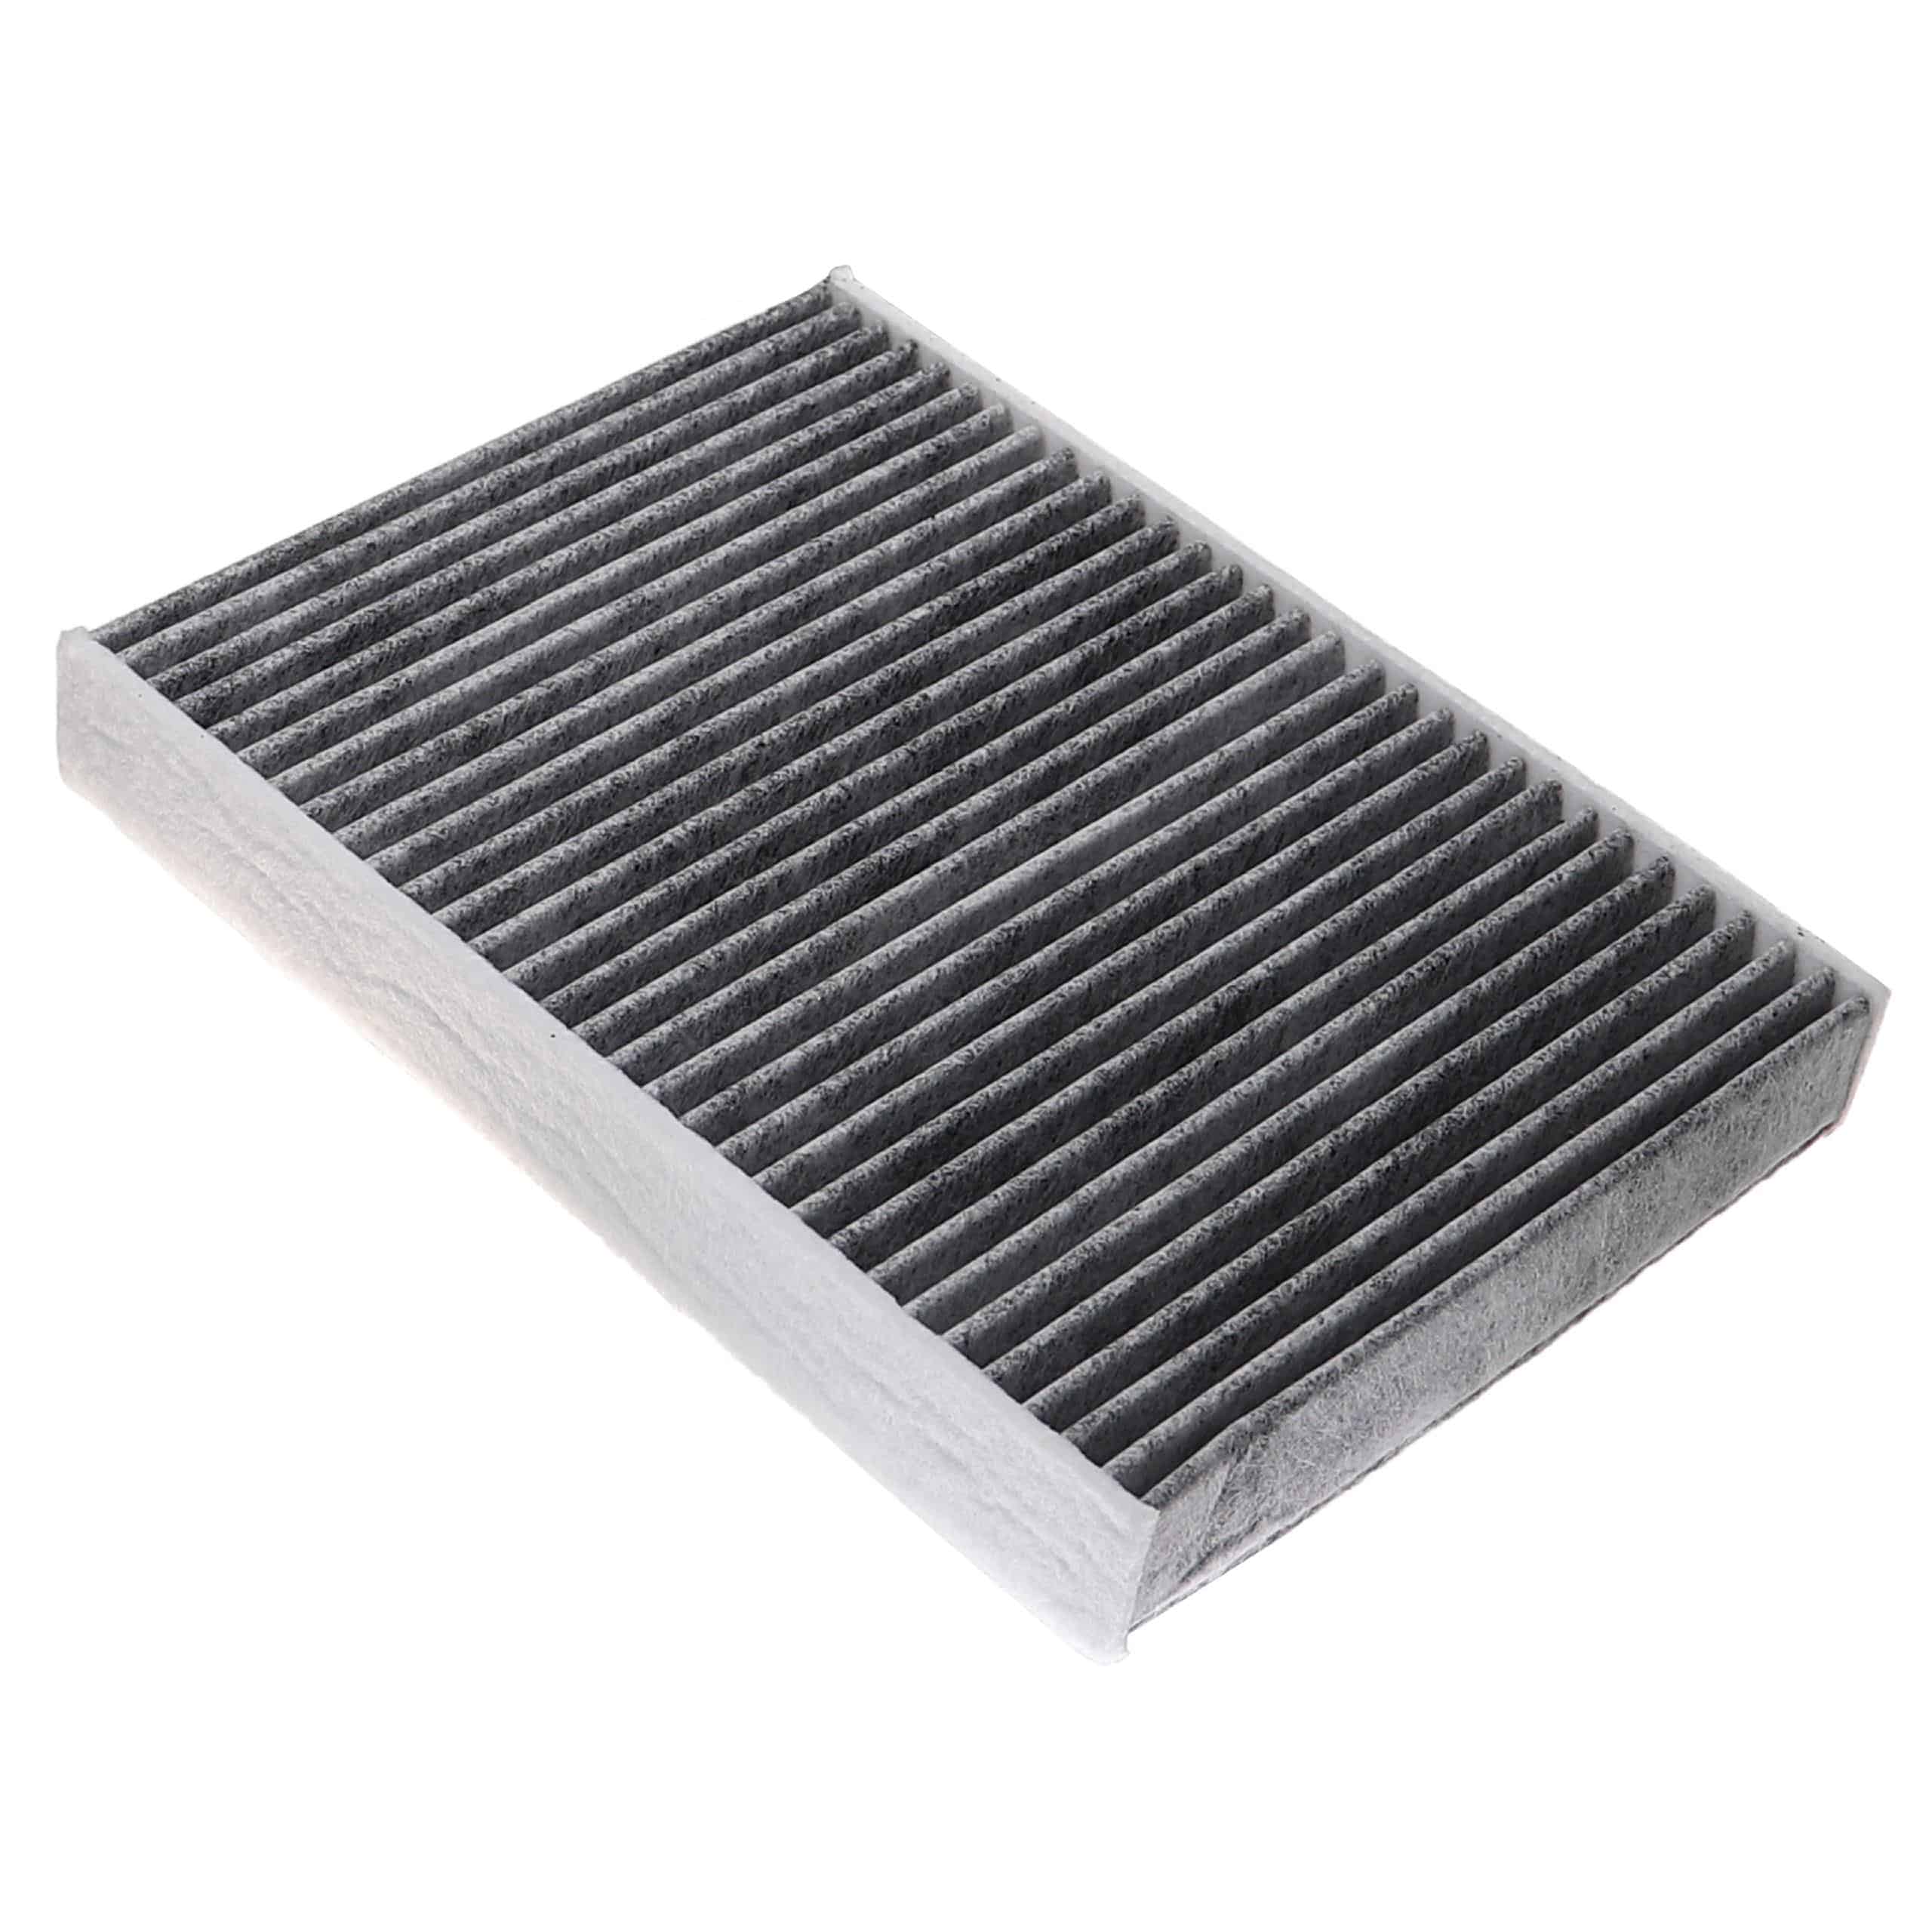 2x Cabin Air Filter replaces 1A First Automotive K30498-2 etc.